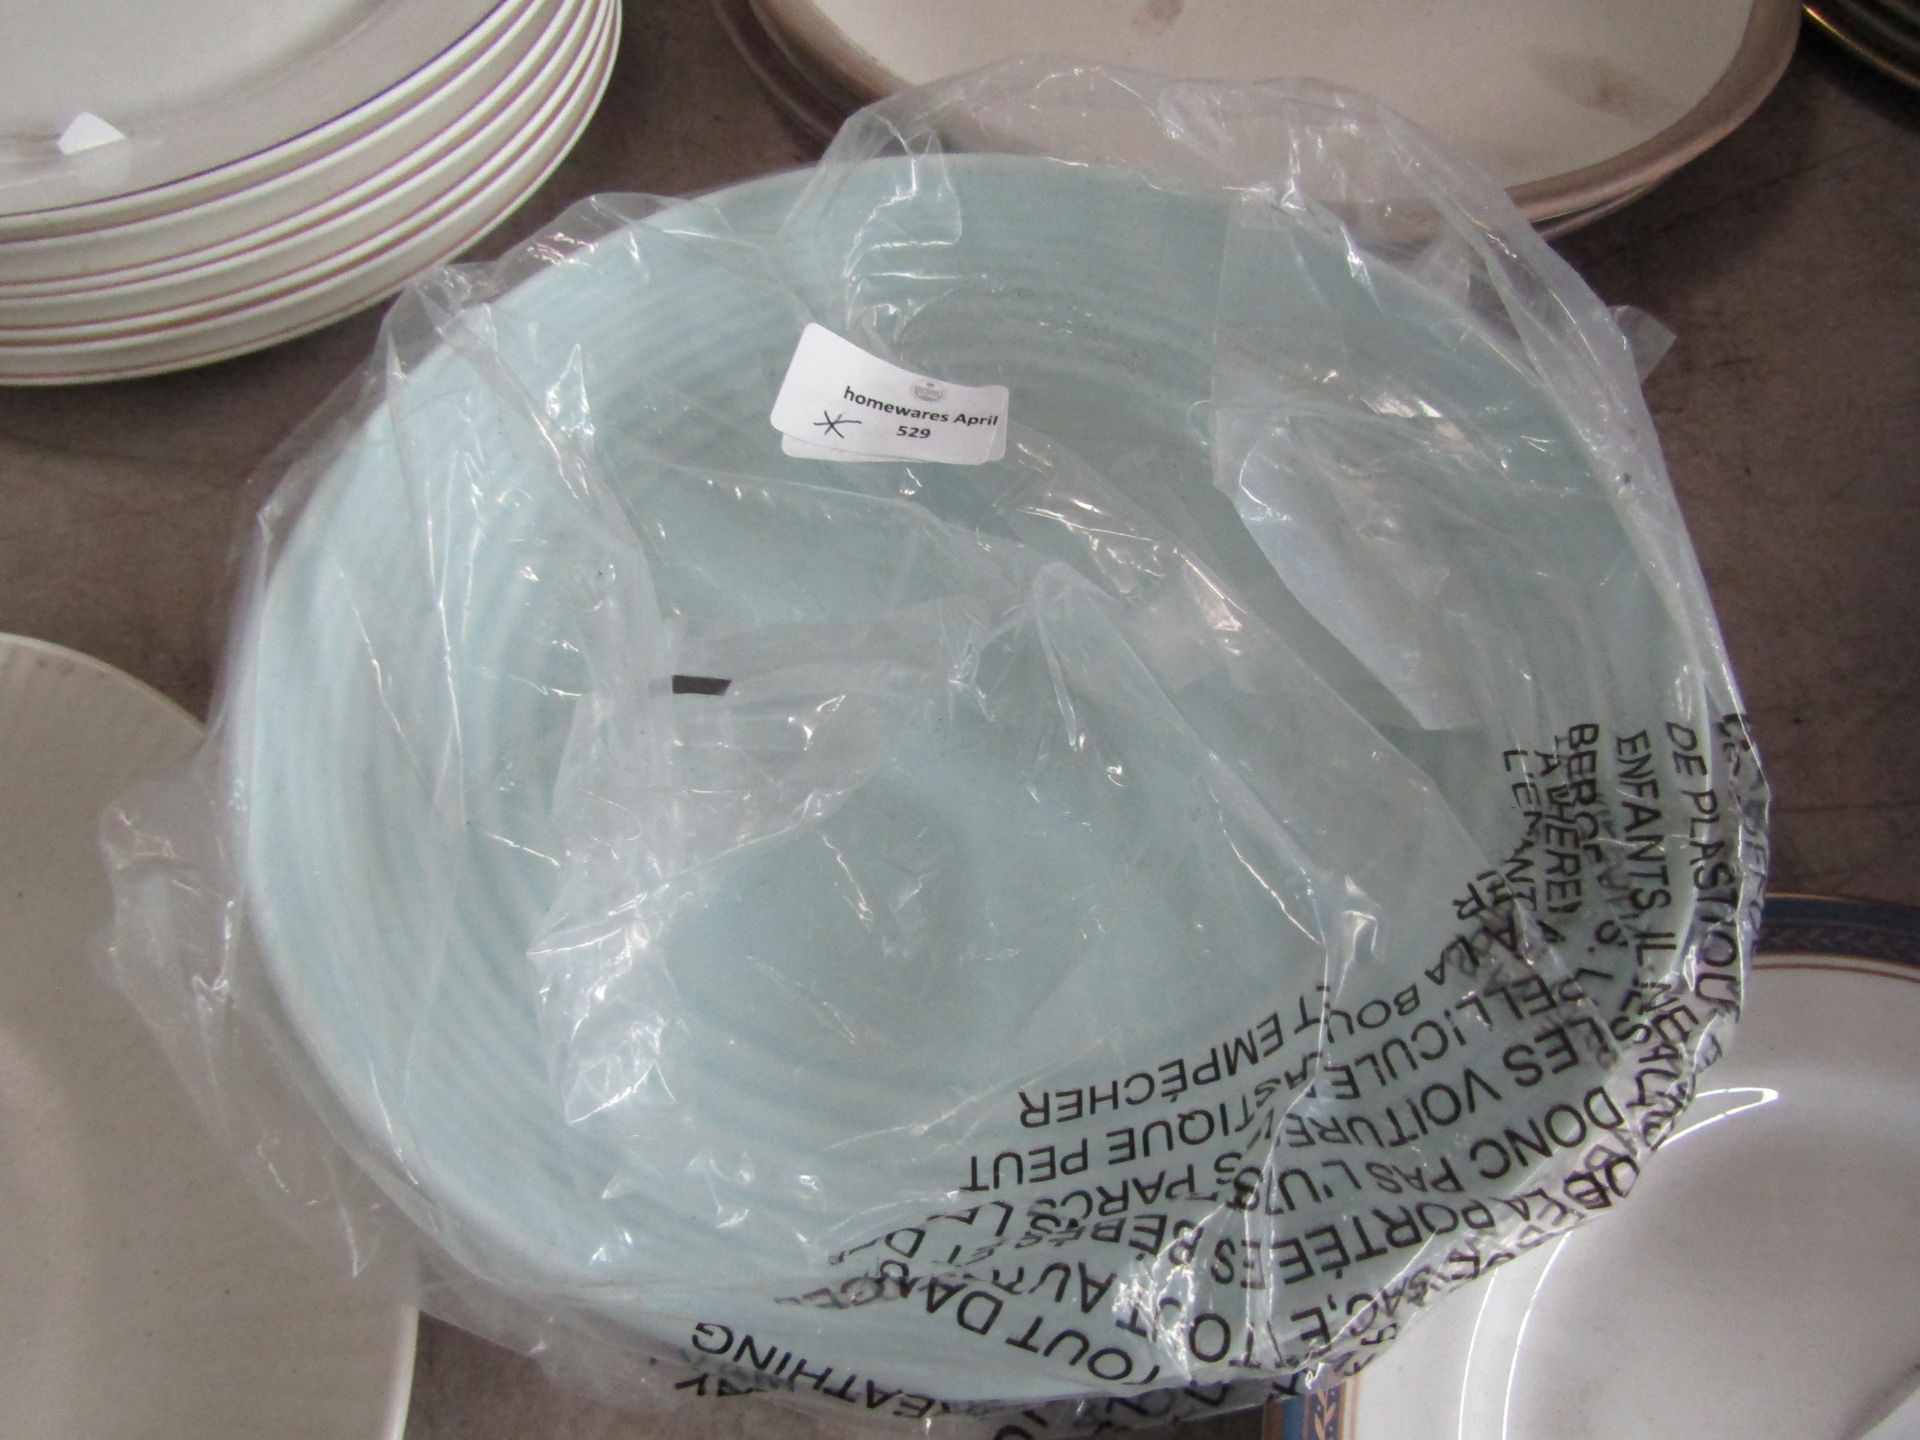 2 x Homeware Outlet Ex-Retail Customer Returns Mixed Lot - Total RRP est. 24About the Product(s)This